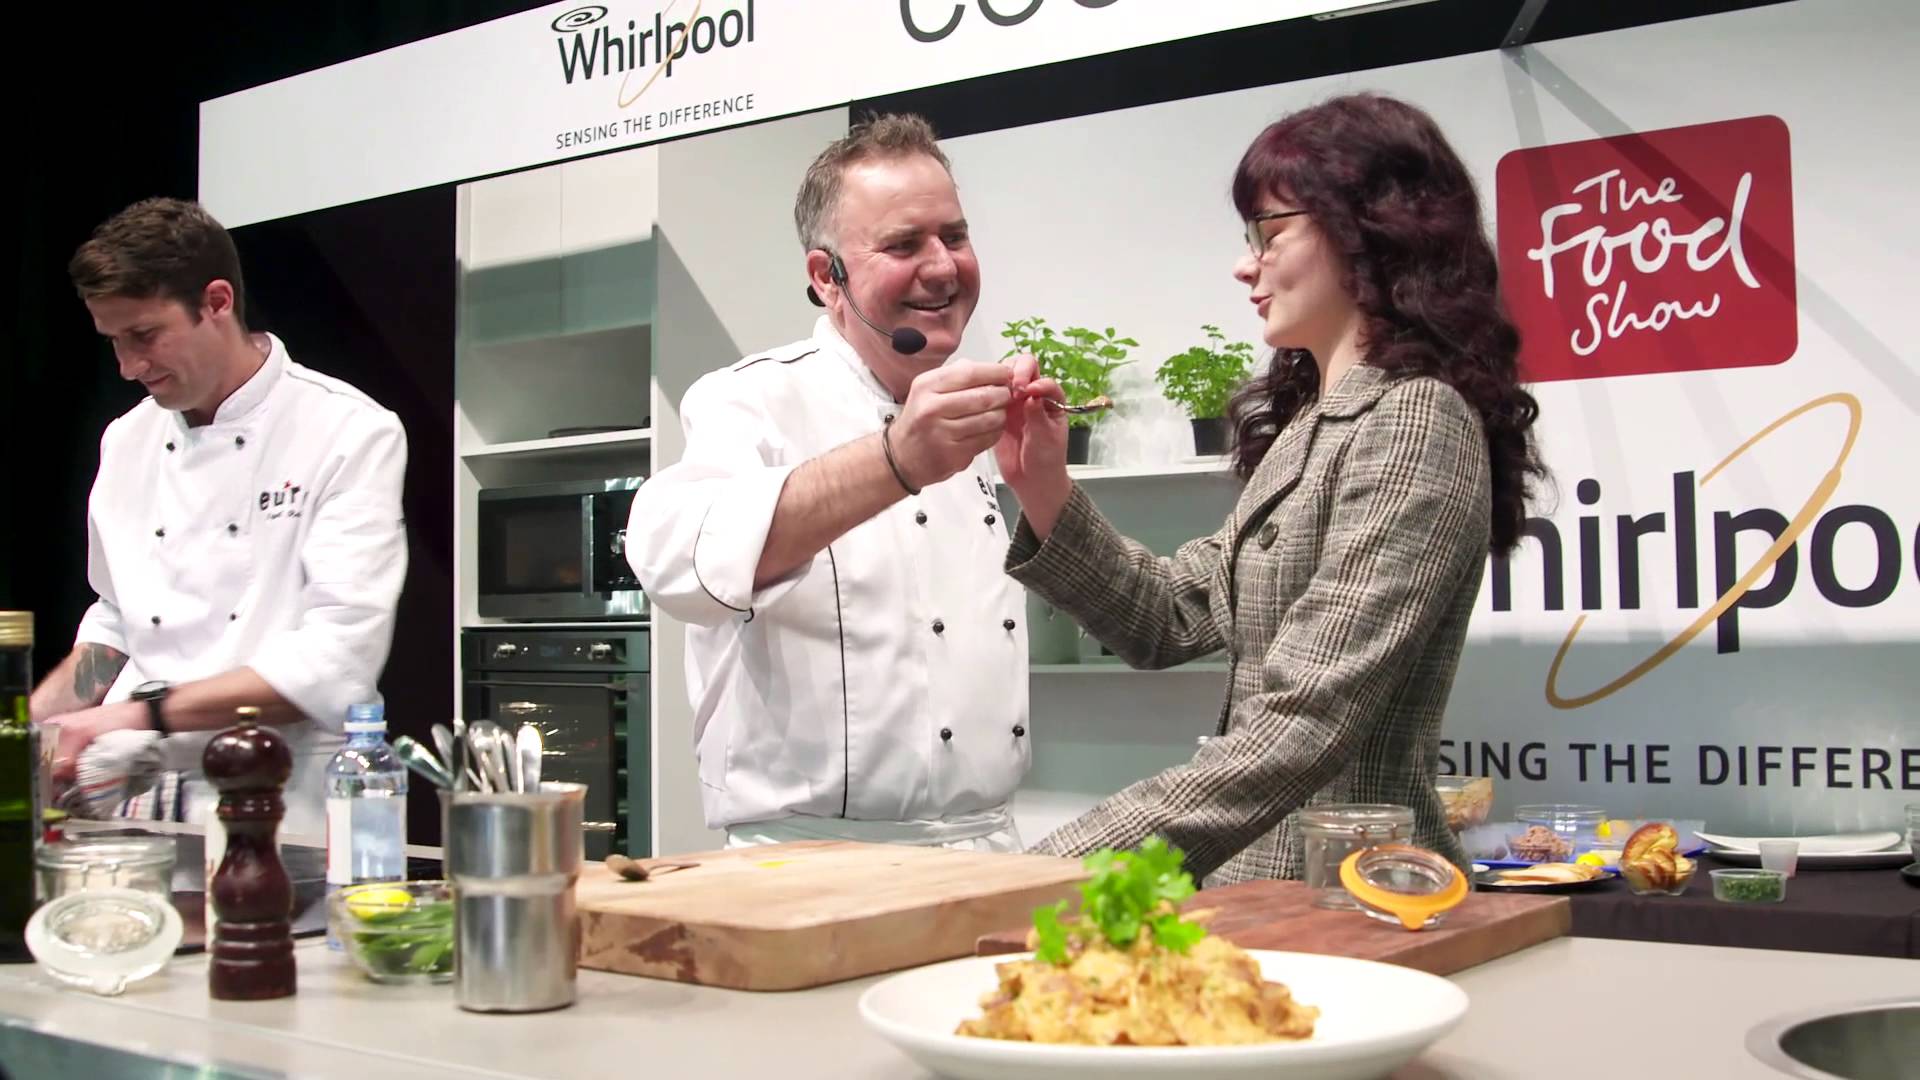 Simon Gault in action at The Food Show. Image via thefoodshownz | ICYMI June 21 | onetakekate.com